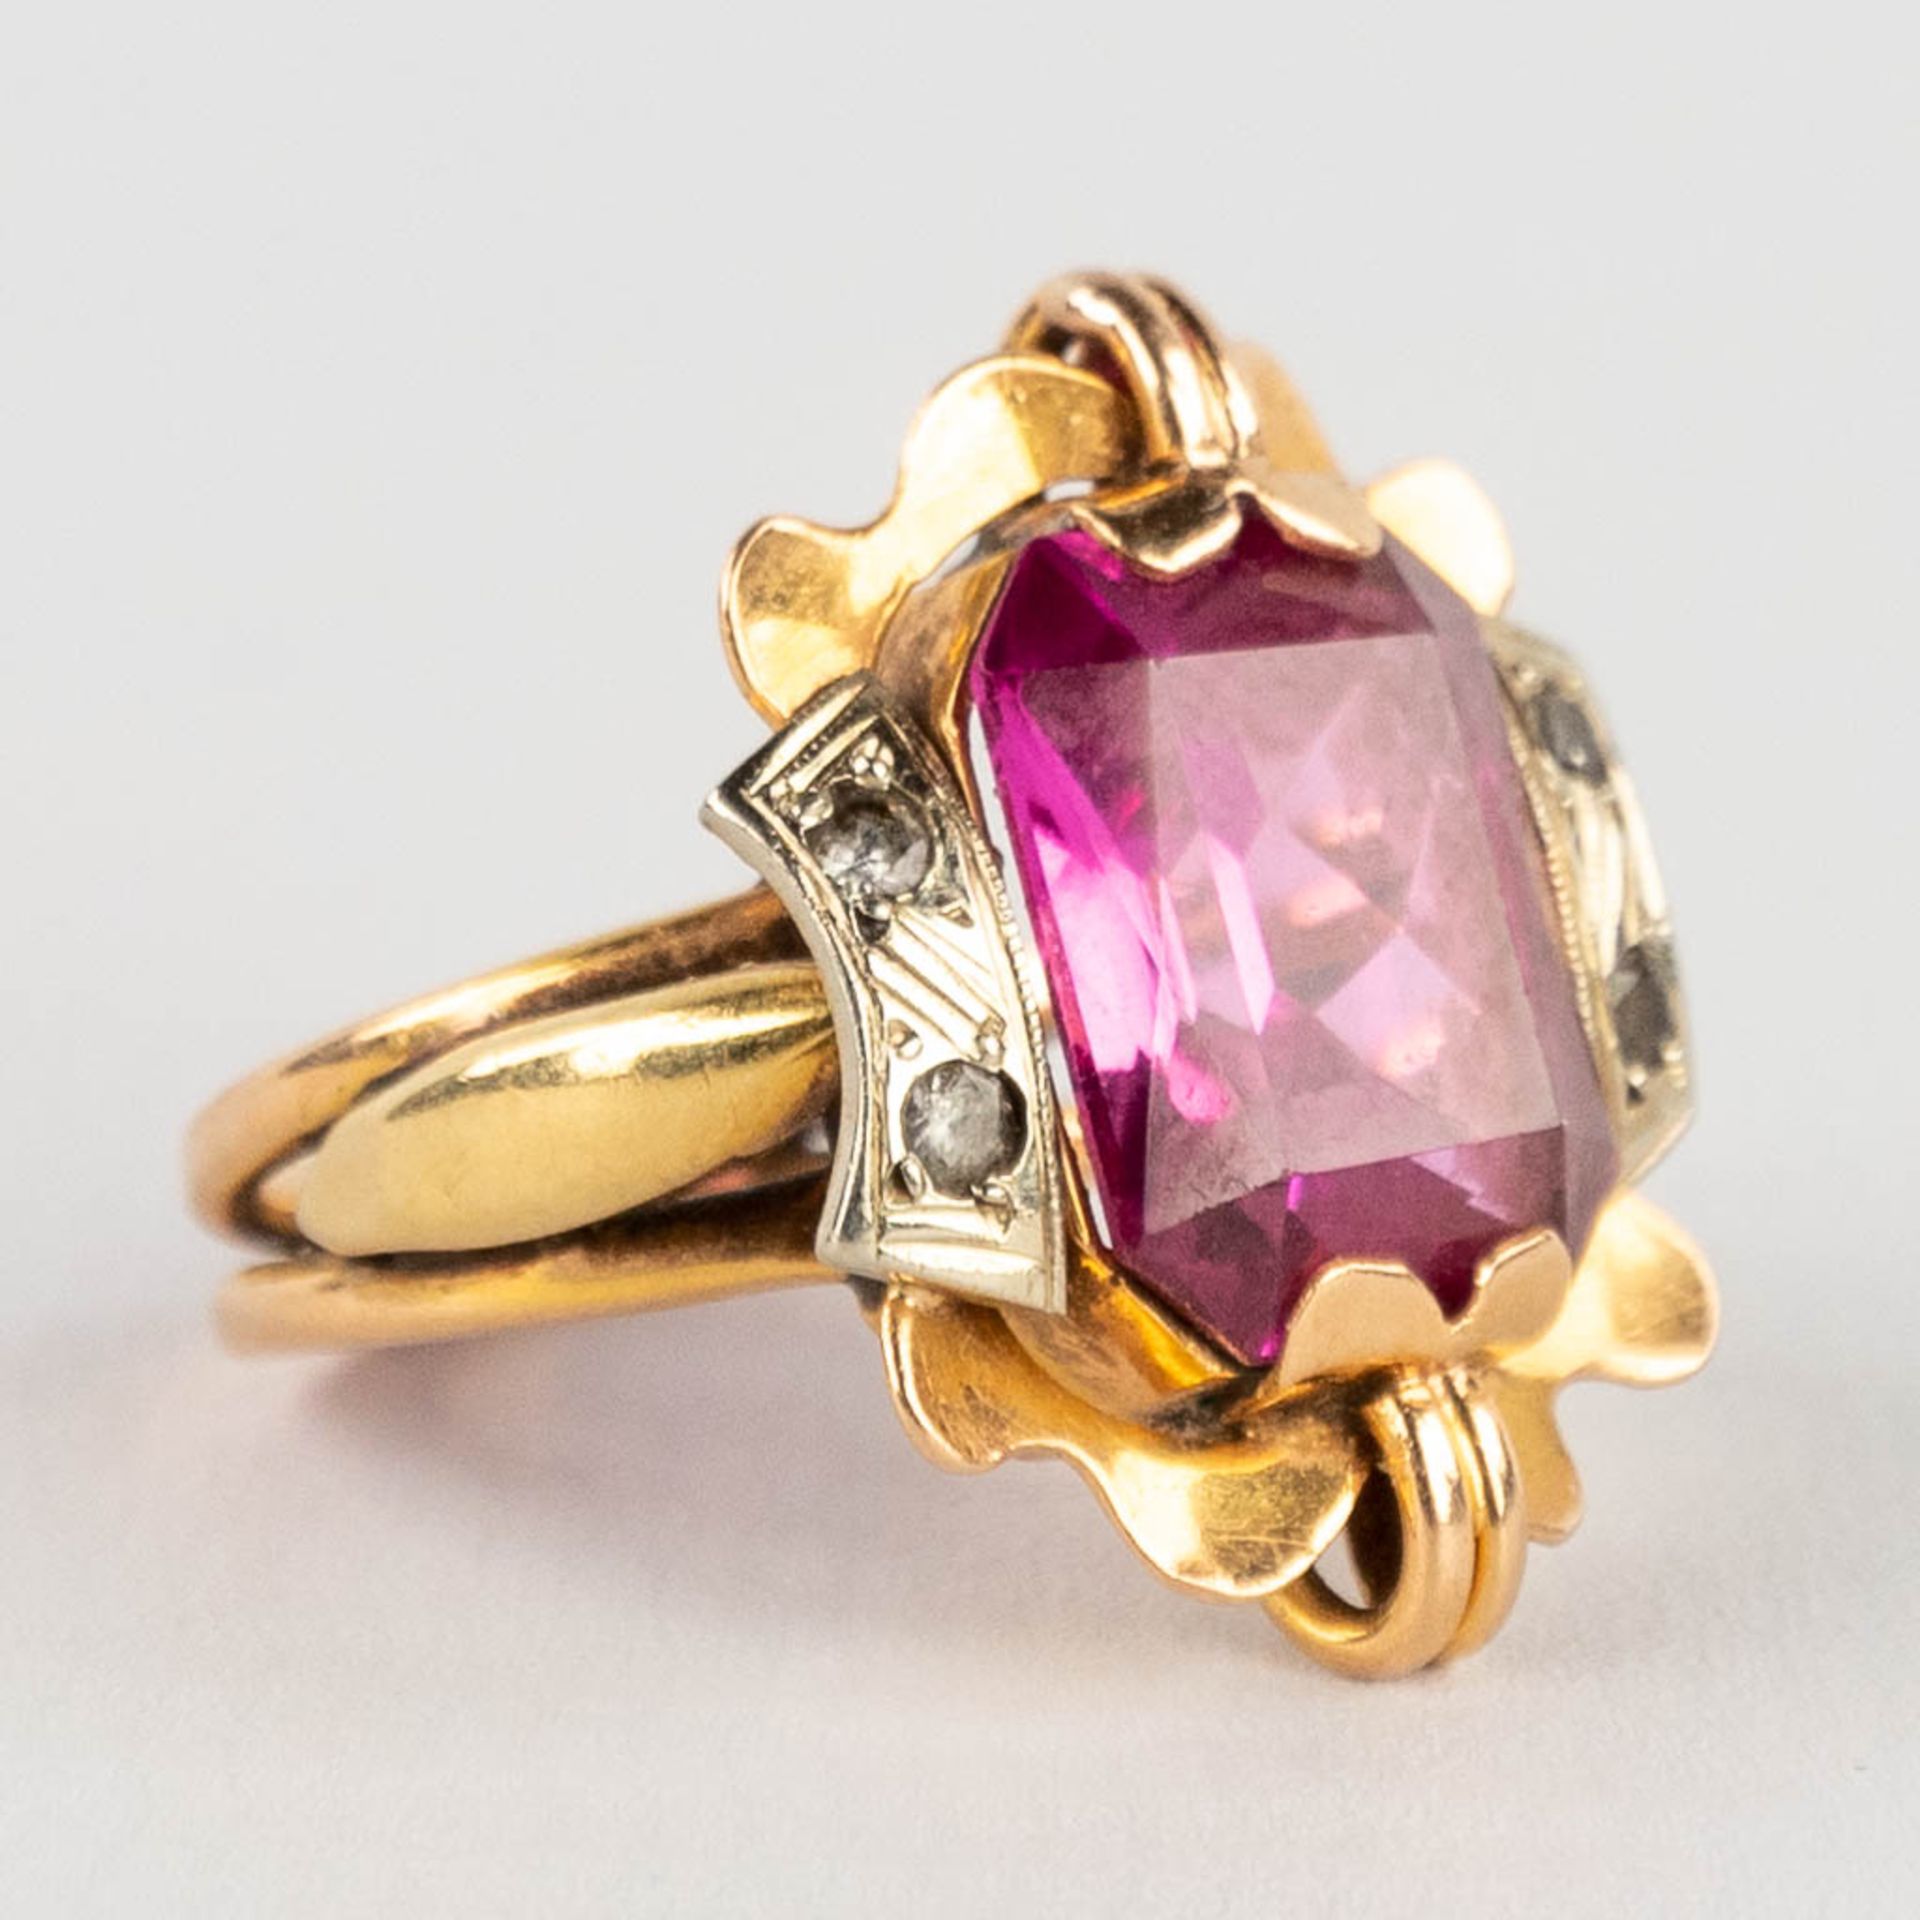 A yellow gold ring with a cut light purple stone/glass. 6,87g. Ring size: 52. - Image 3 of 9